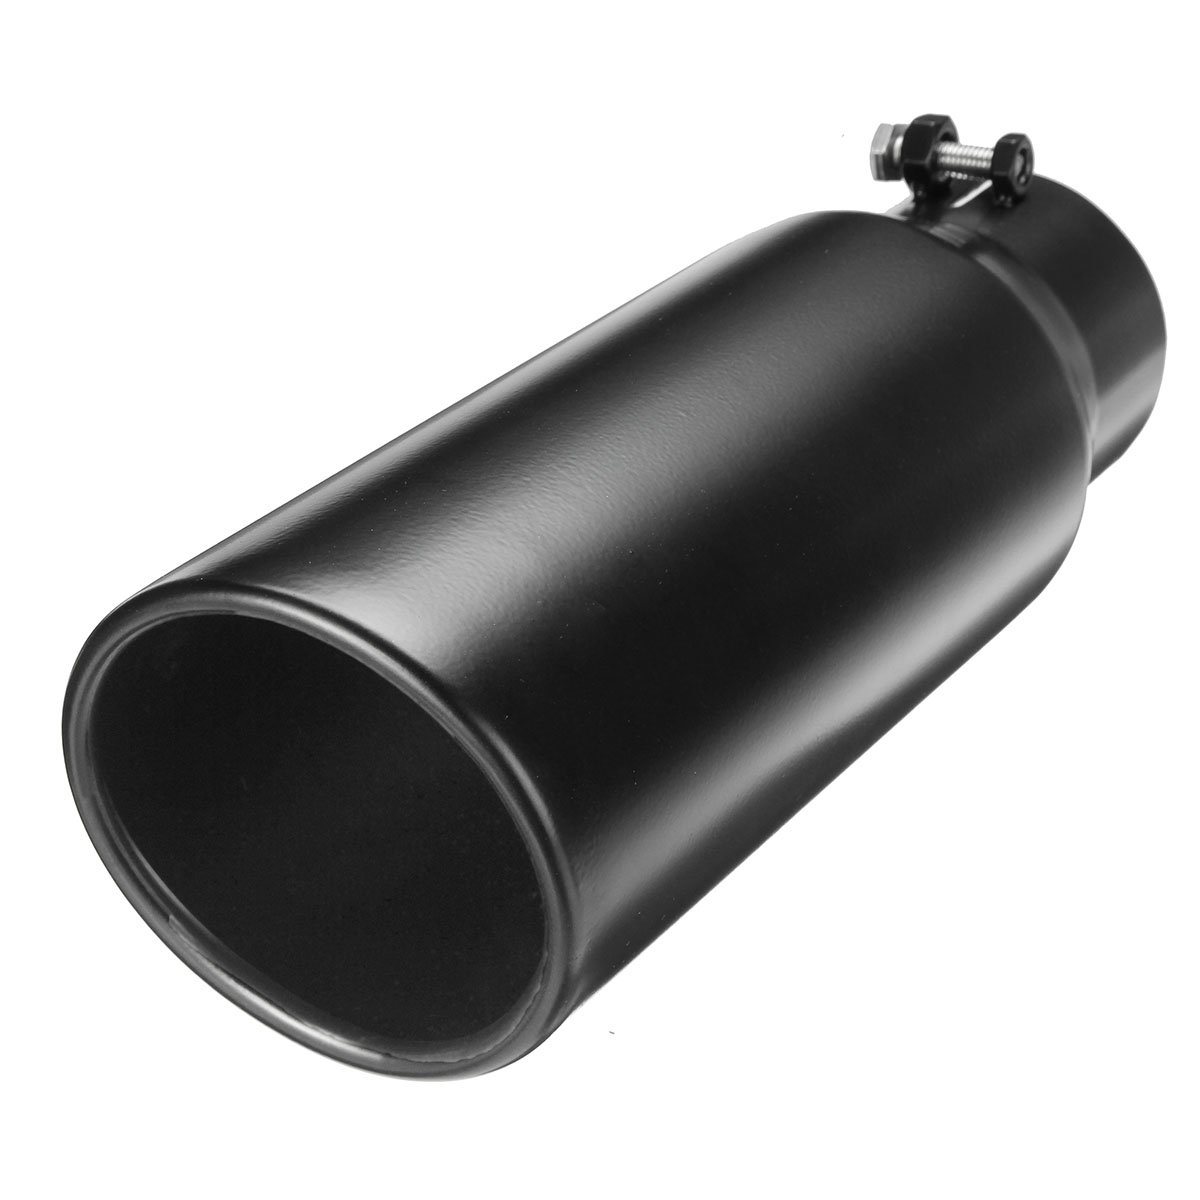 Universal-Stainless-Steel-Exhaust-Muffler-Diesel-3-Inch-Inlet-4-Inch-Outlet-Inch-1404796